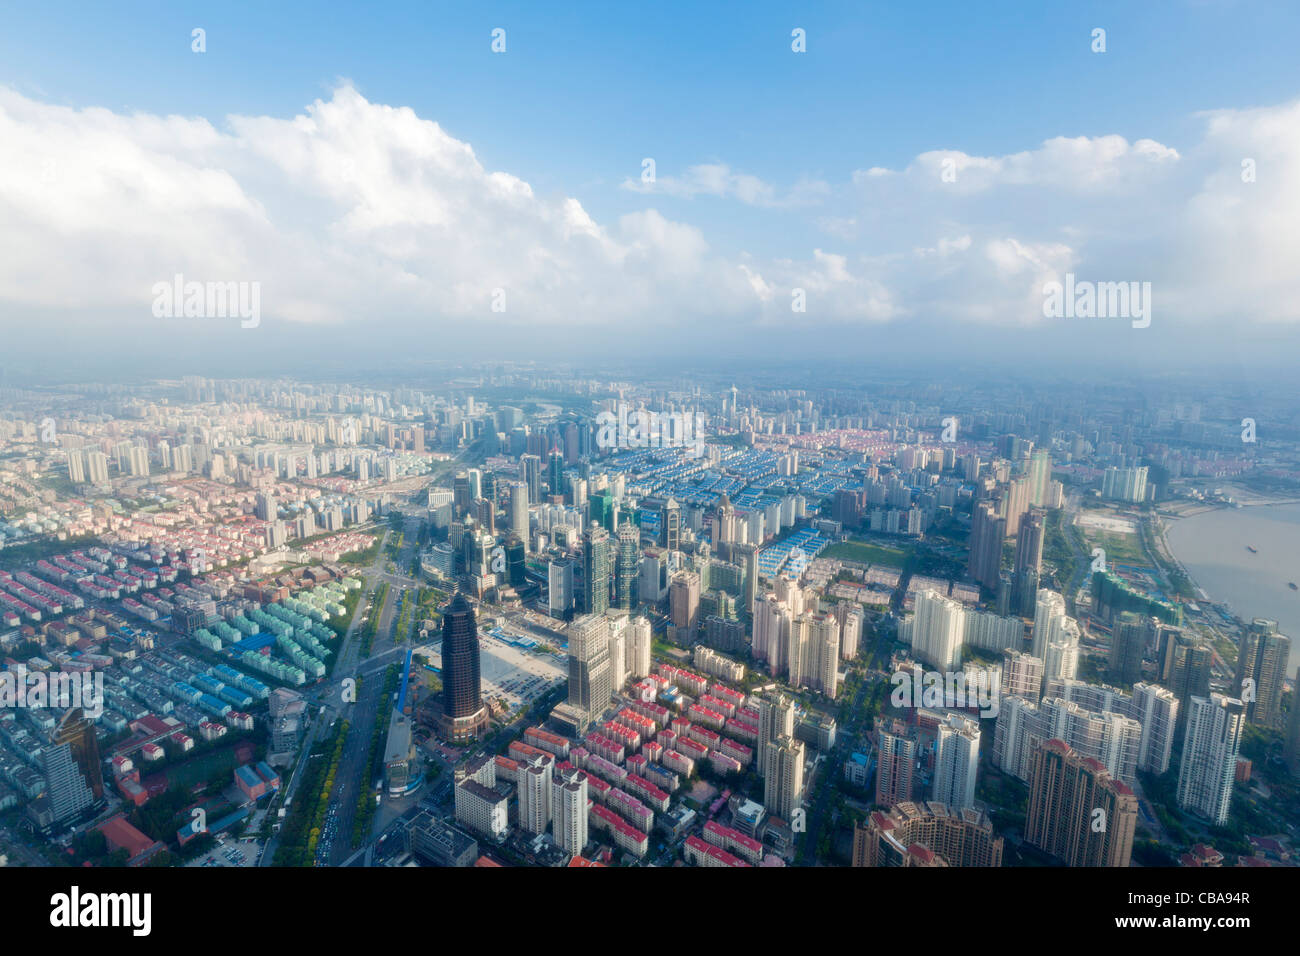 Shanghai Skyline, with Pudong skyscrapers and residential properties, Huangpu River, PRC, People's Republic of China, Asia Stock Photo